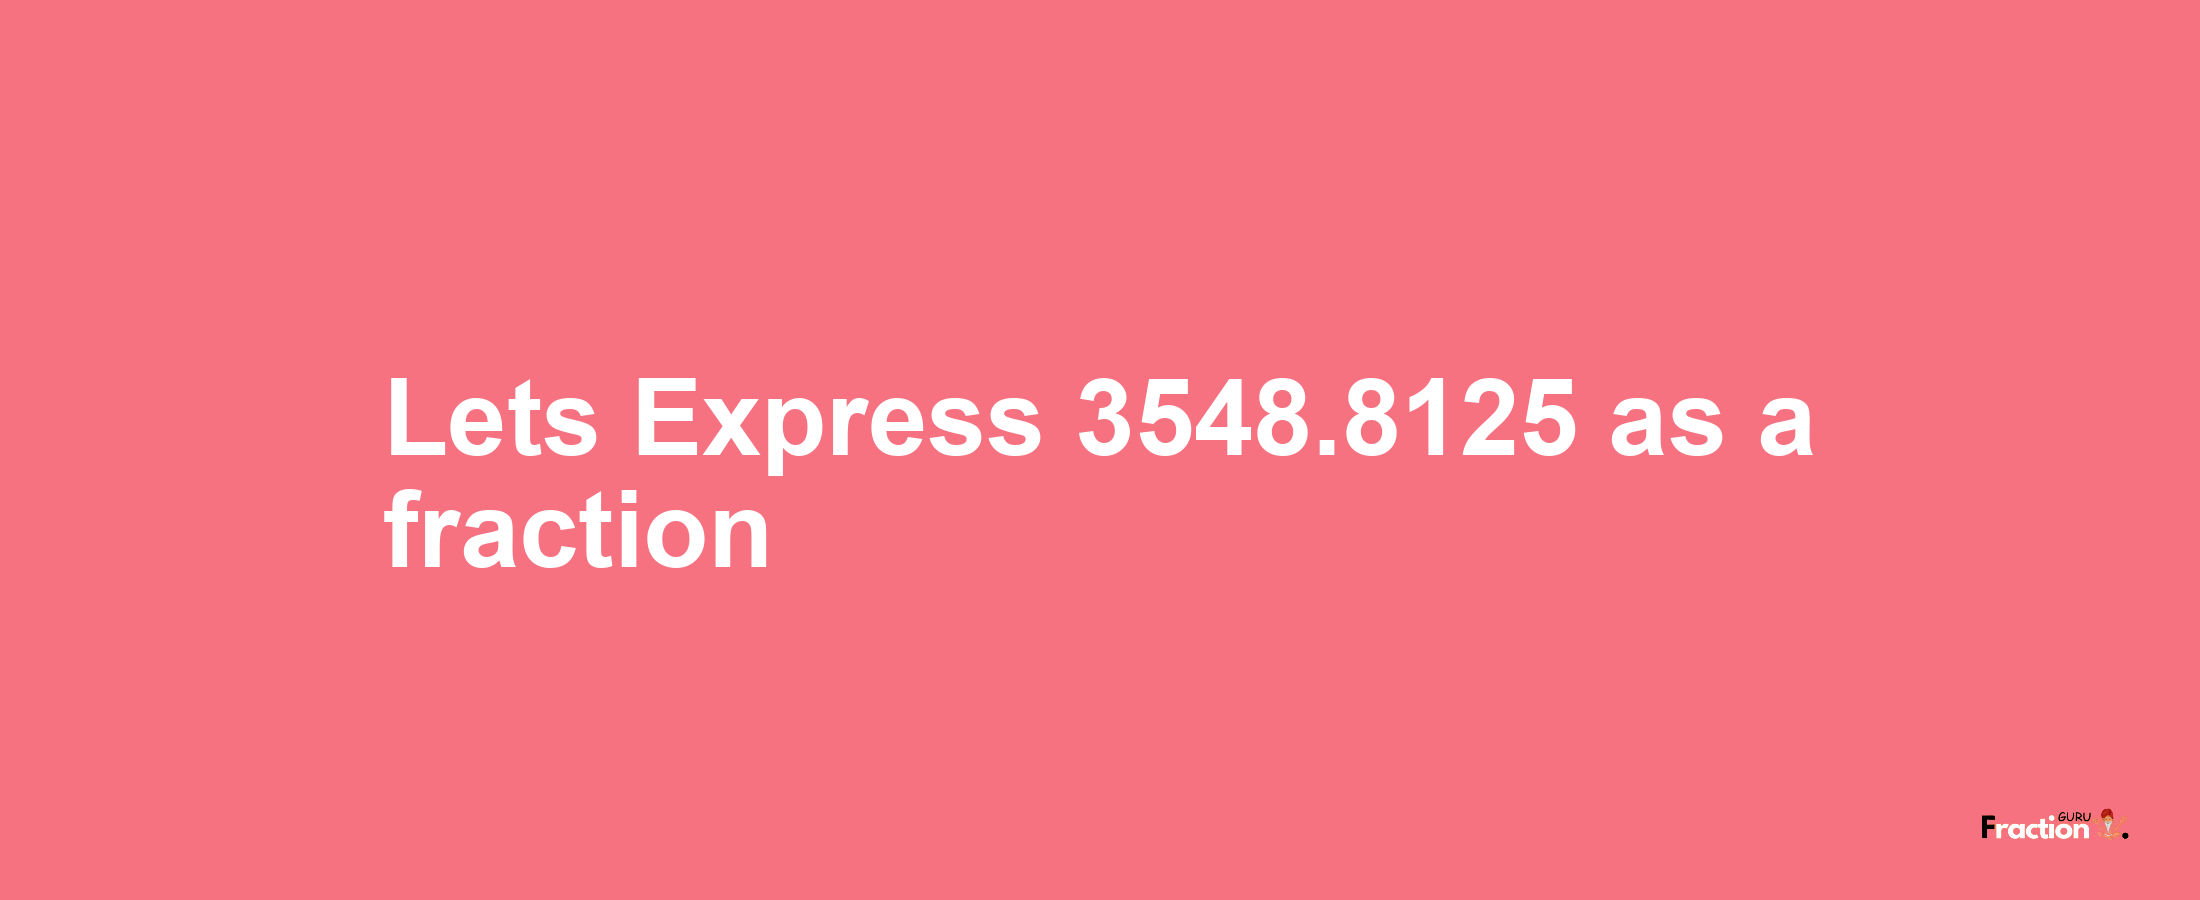 Lets Express 3548.8125 as afraction